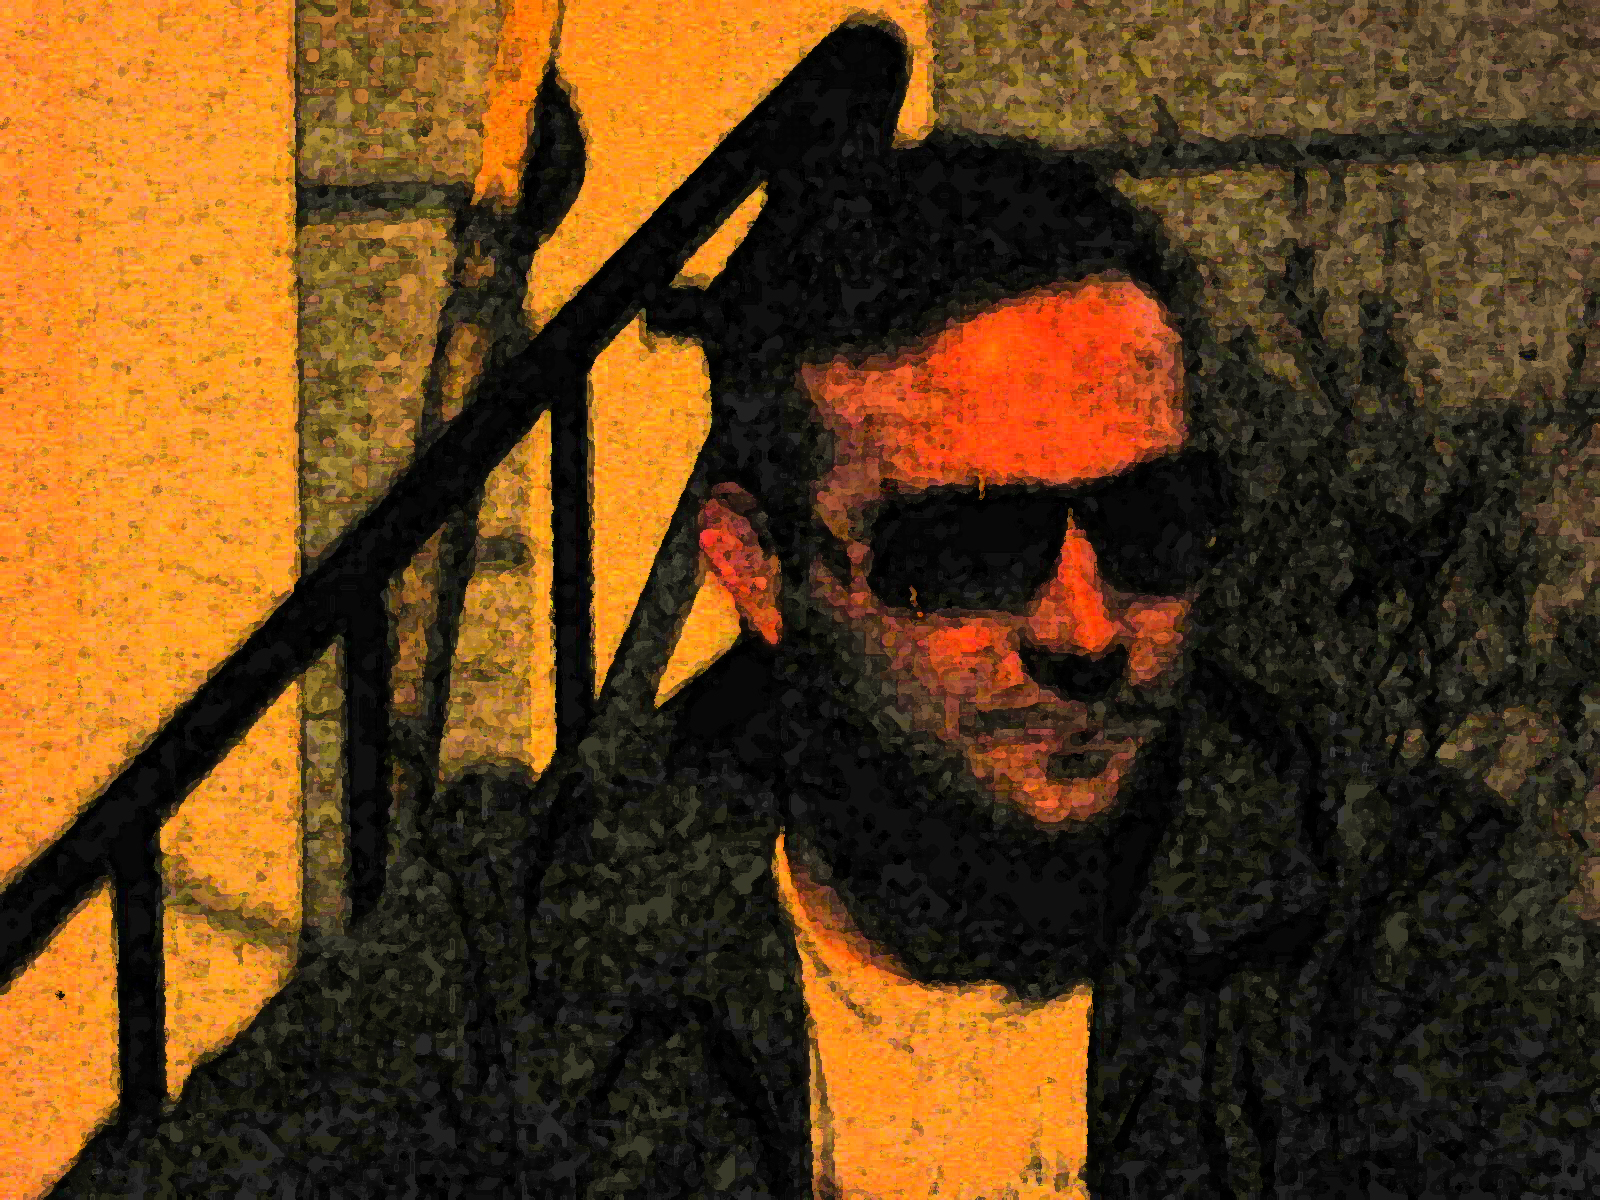 a man in sunglasses is standing near stairs